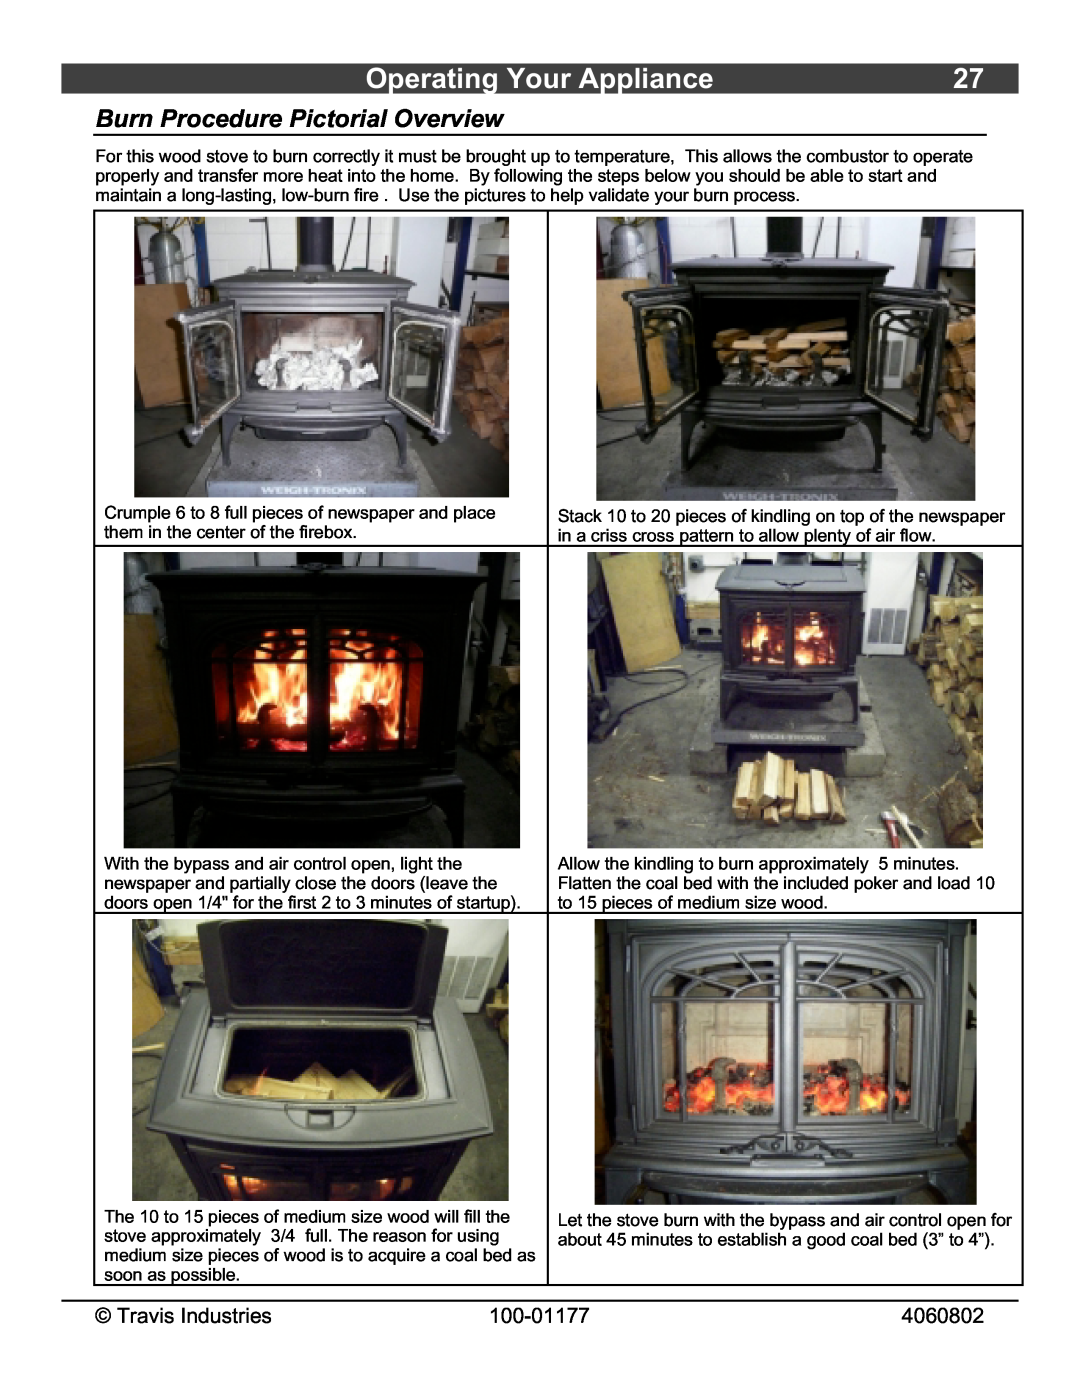 Lopi Stove owner manual Operating Your Appliance, Burn Procedure Pictorial Overview 